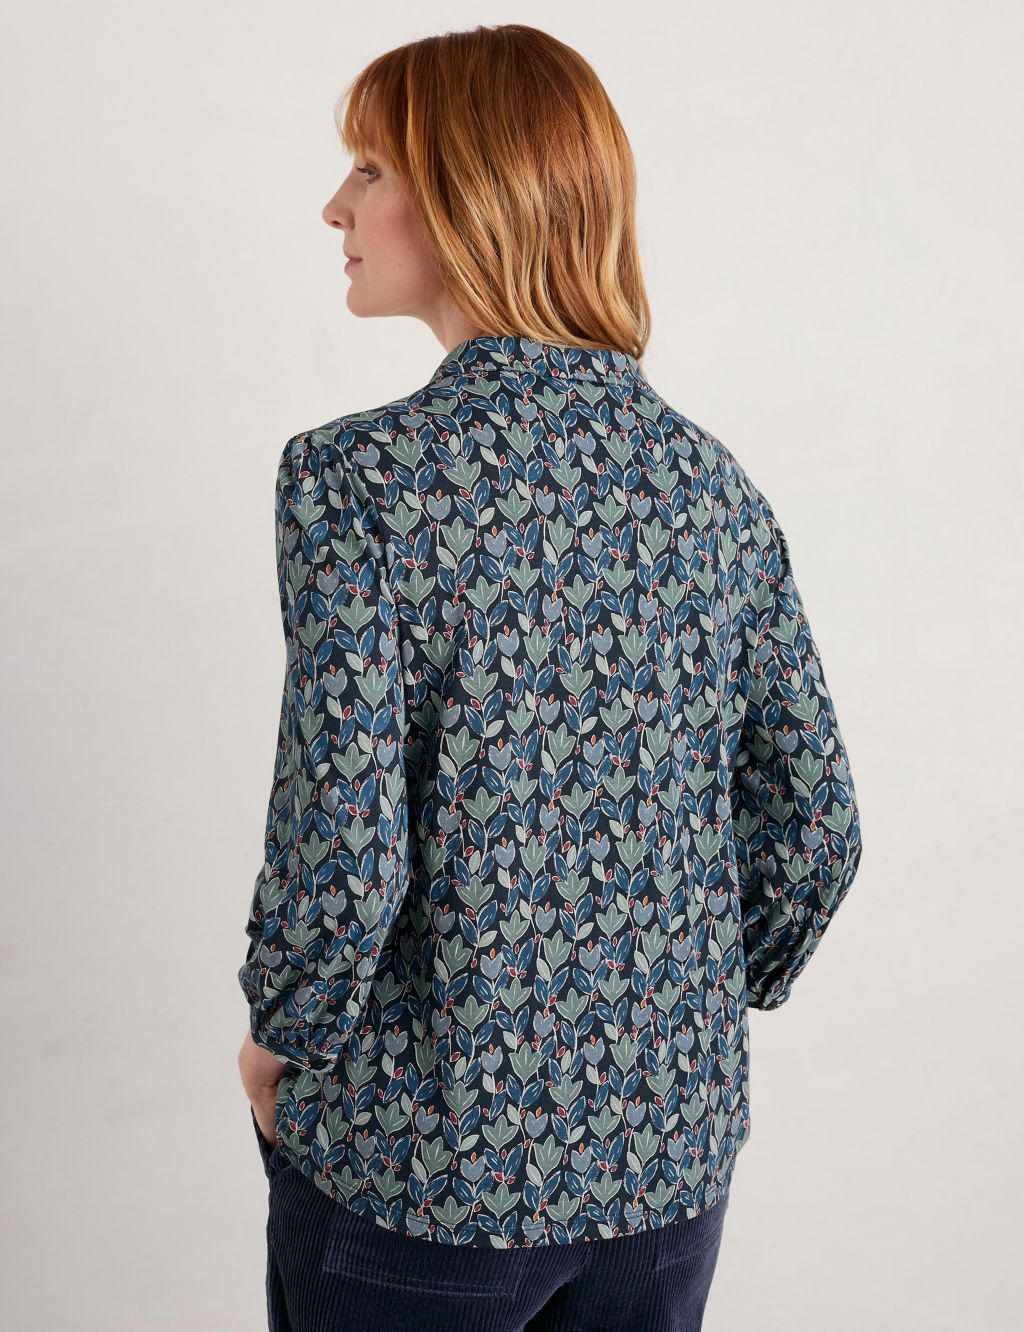 Cotton Modal Blend Floral Collared Shirt image 4